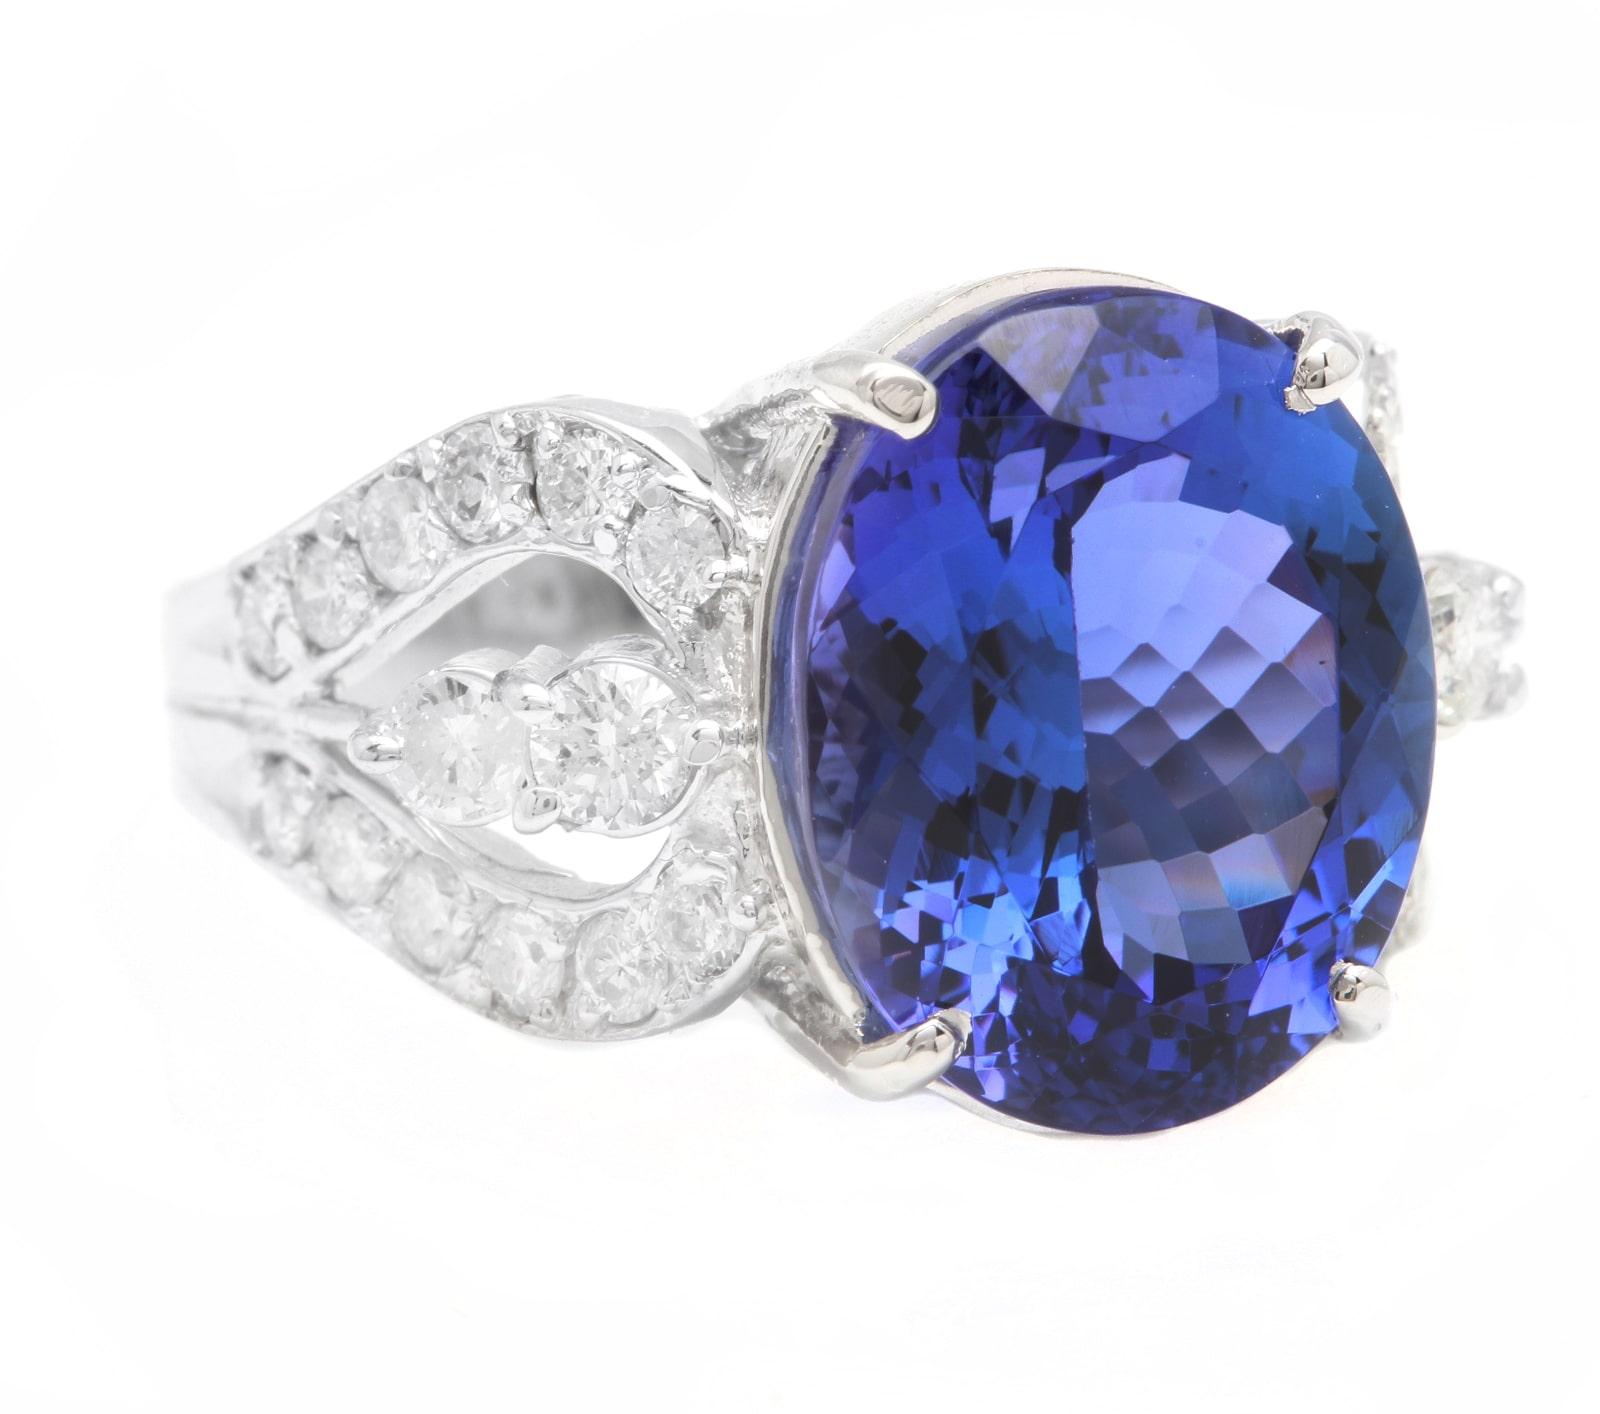 9.50 Carats Natural Very Nice Looking Tanzanite and Diamond 14K Solid White Gold Ring

Suggested Replacement Value: Approx.  $10,000.00

Total Natural Oval Cut Tanzanite Weight is: Approx. 8.50 Carats 

Tanzanite Measures: Approx. 14.00 x 11.00mm
